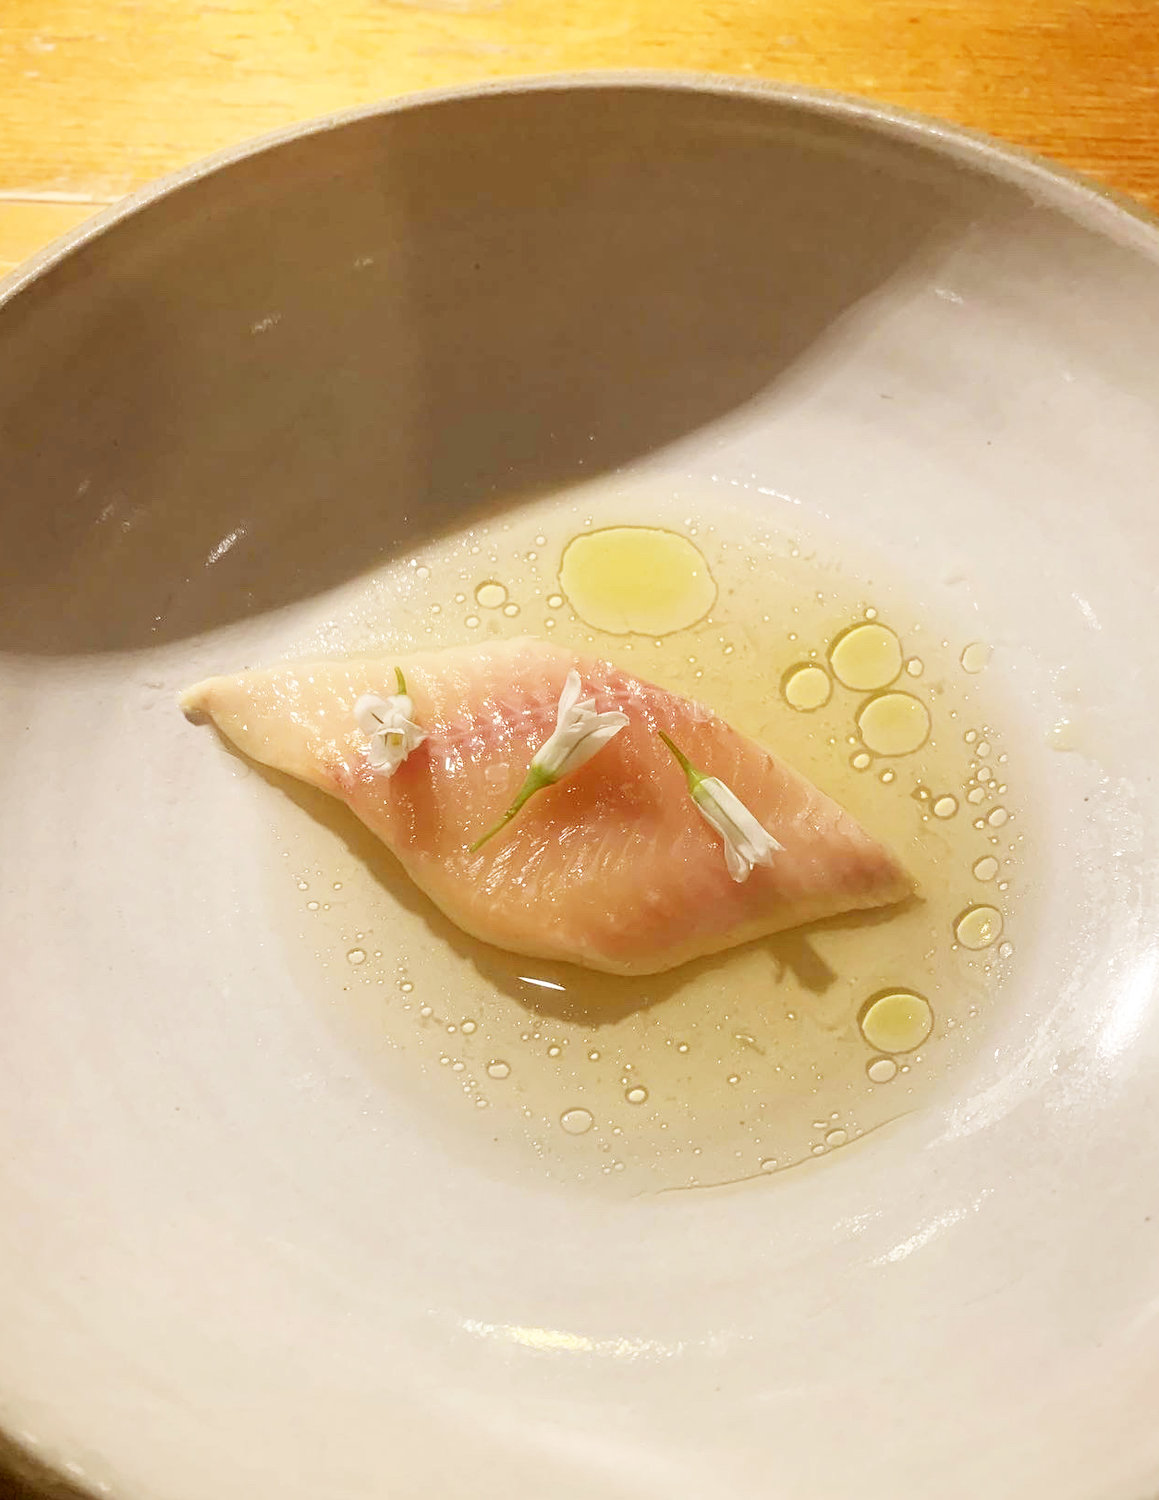 My favorite course of the night was  a crystal-clear smoked trout consommé, topped with delicate onion flowers.